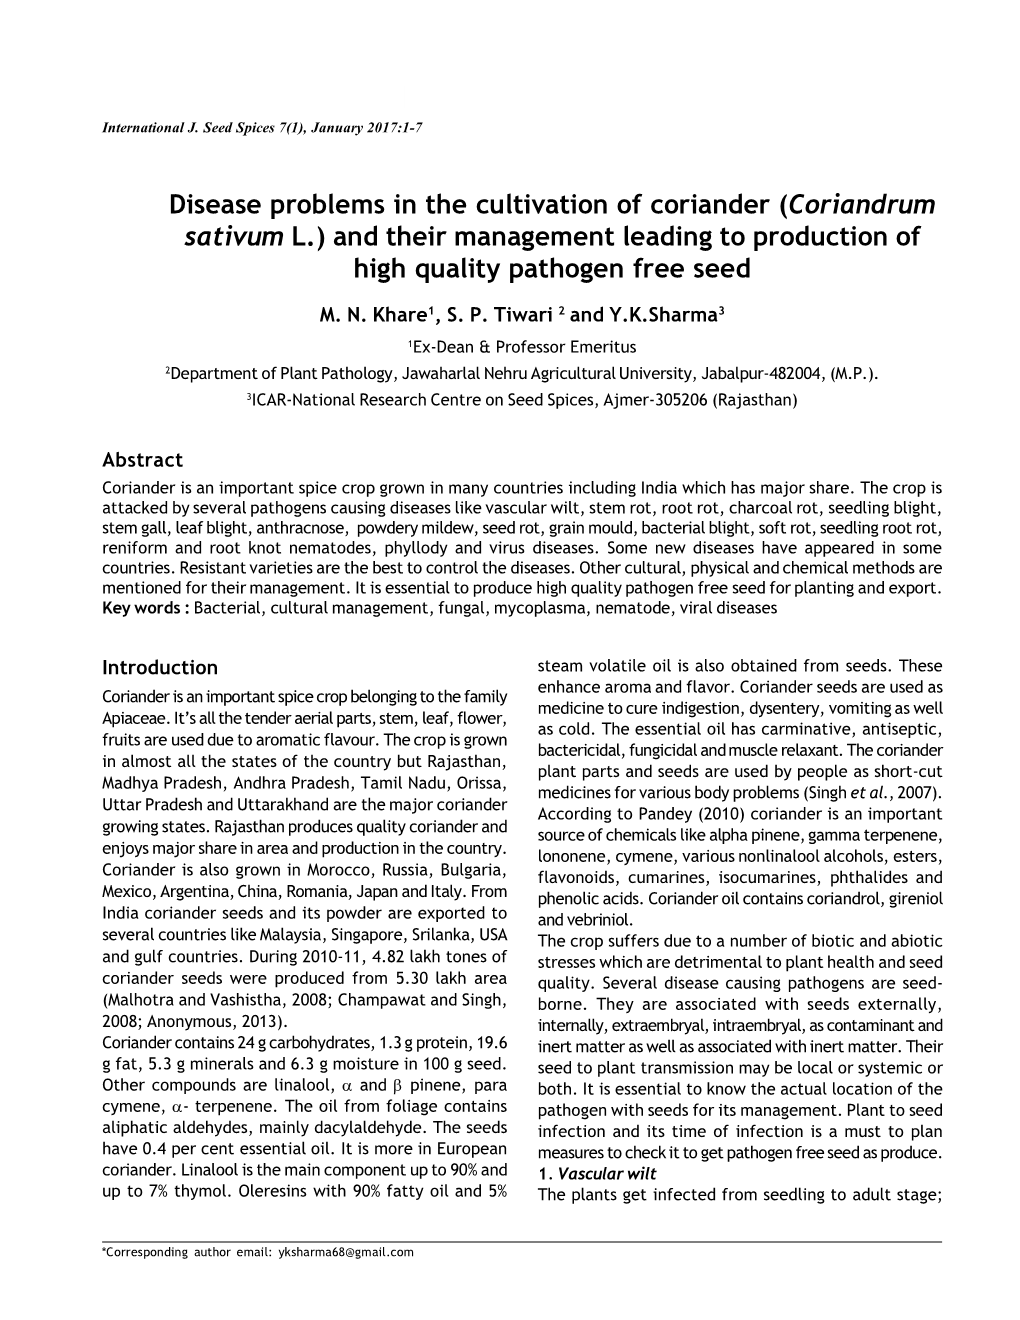 Disease Problems in the Cultivation of Coriander (Coriandrum Sativum L.) and Their Management Leading to Production of High Quality Pathogen Free Seed